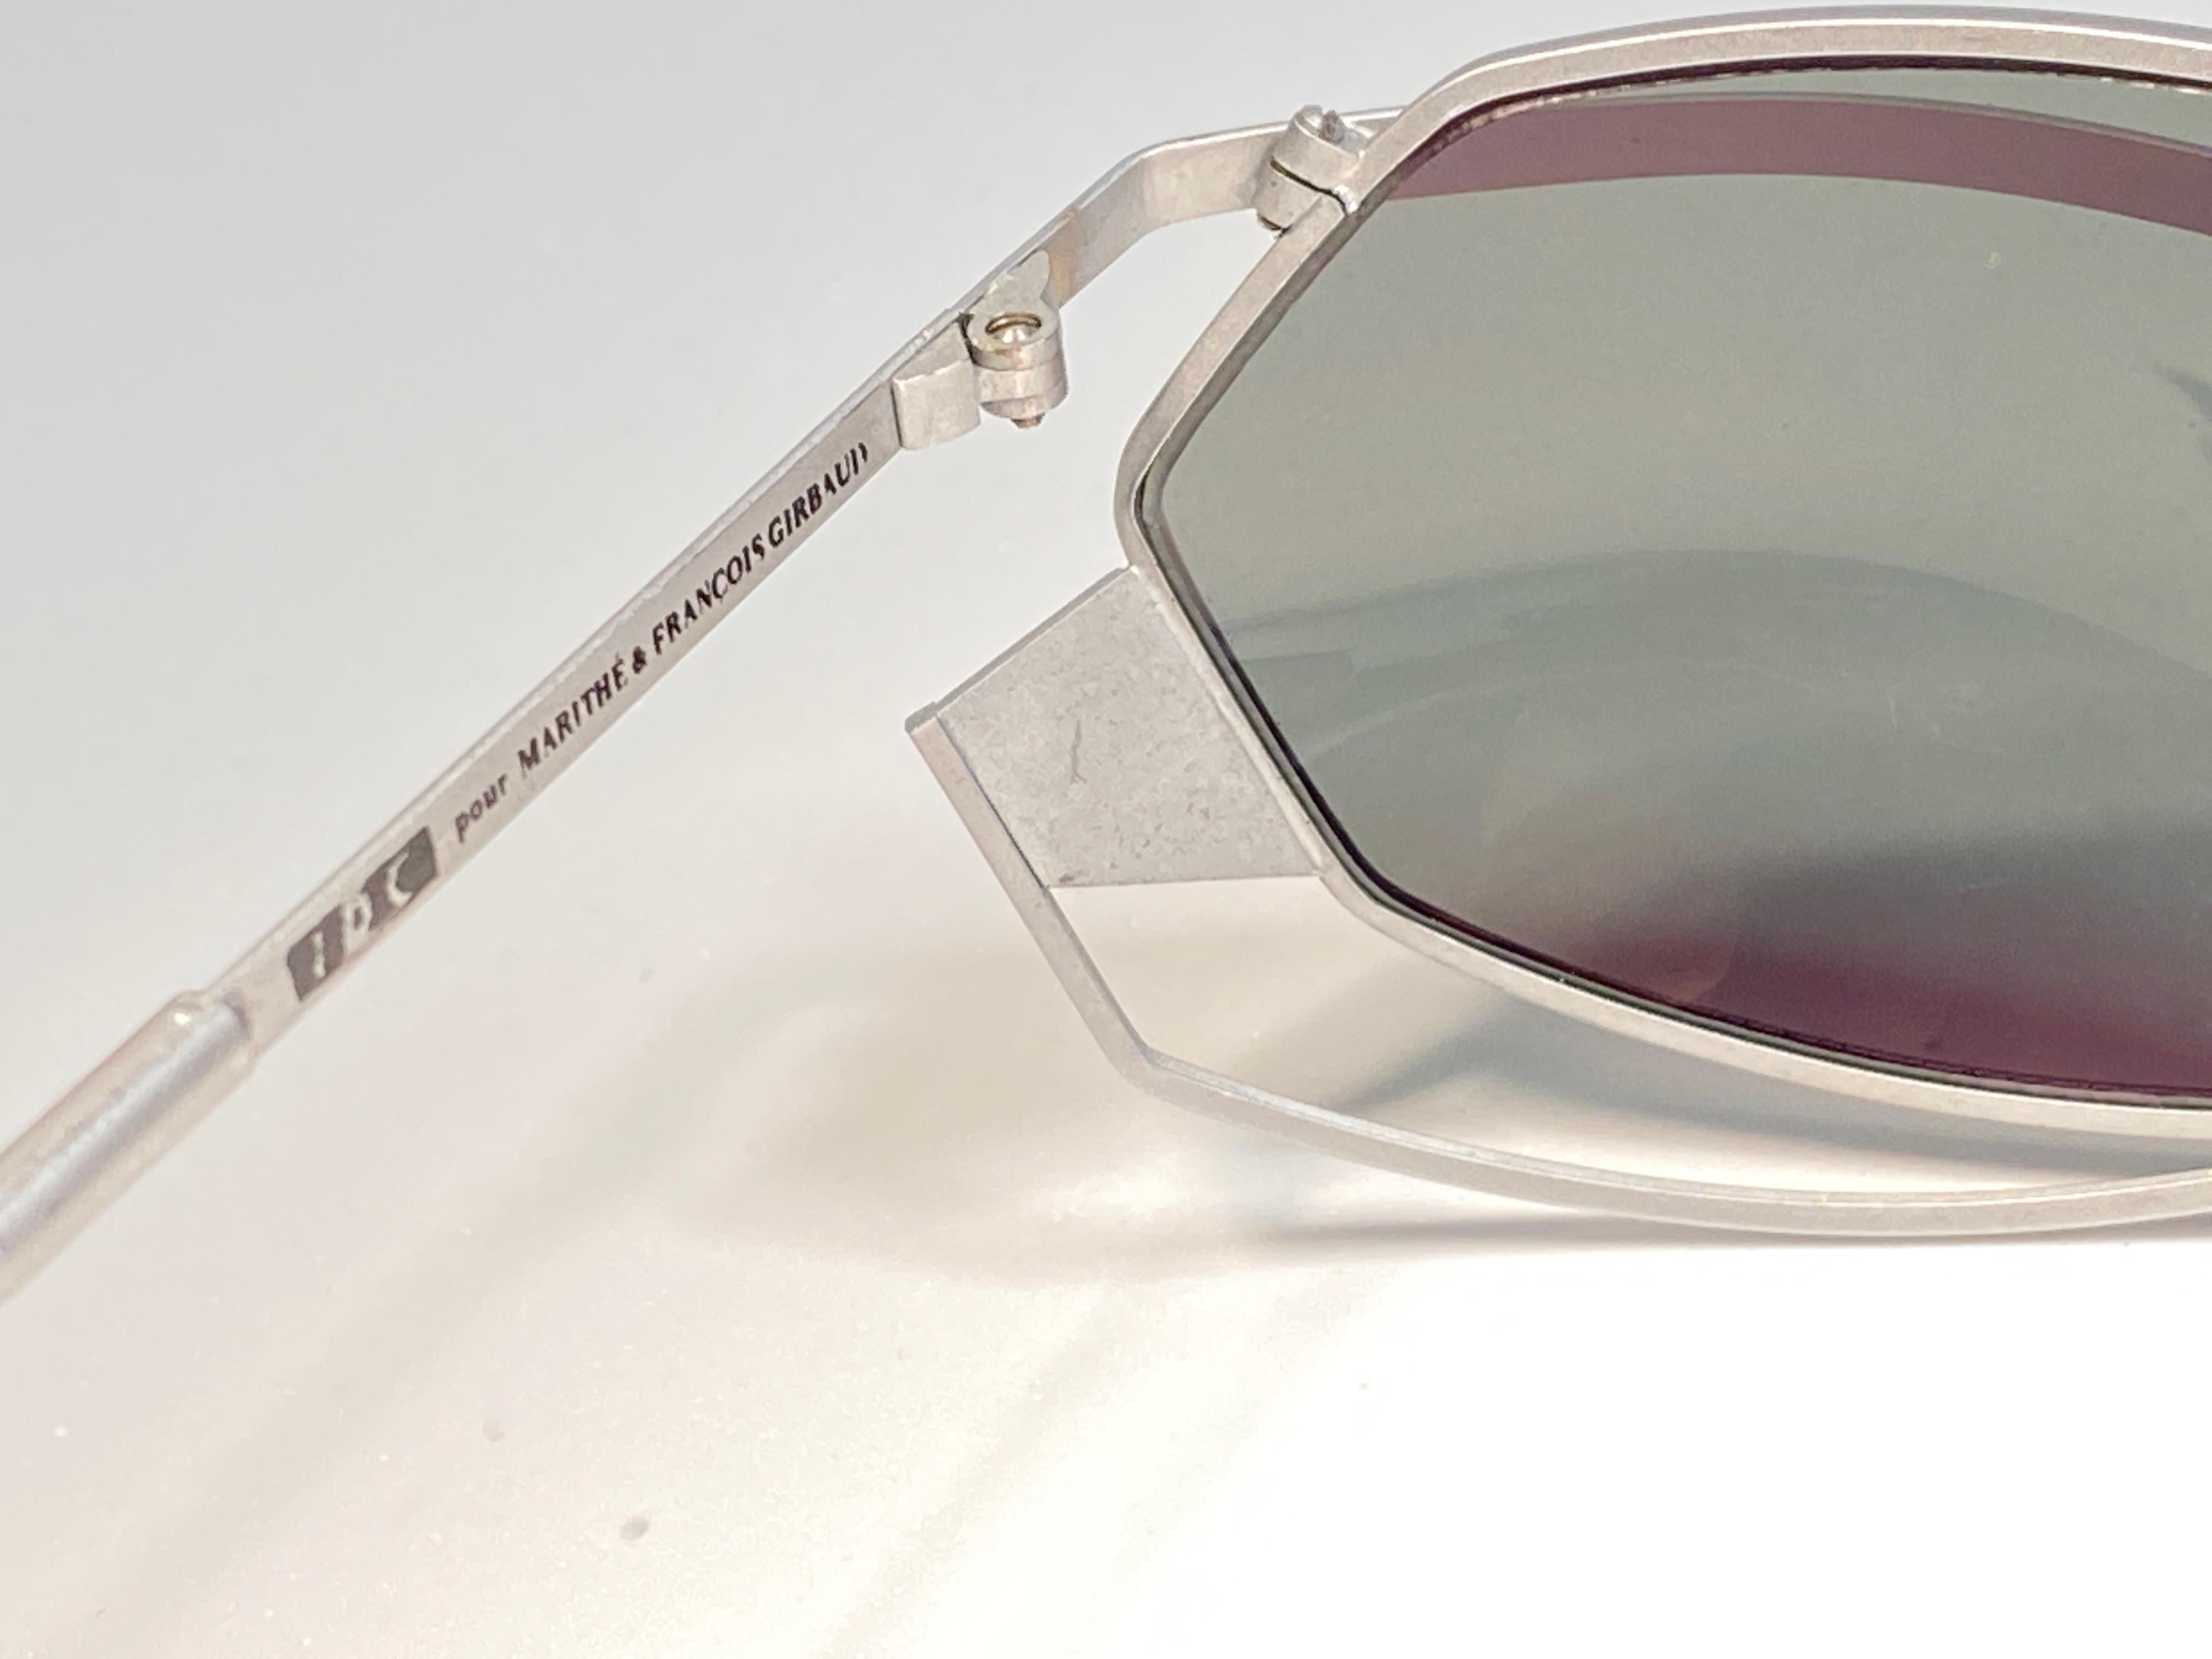 

IDC Pour Marithe Francois Girbaud round silver with engraved accents sunglasses holding a spotless pair of Lligh lenses. Curled temples for a fashionable yet comfortable wear.

New, never worn or displayed. This pair could show minor sign of wear